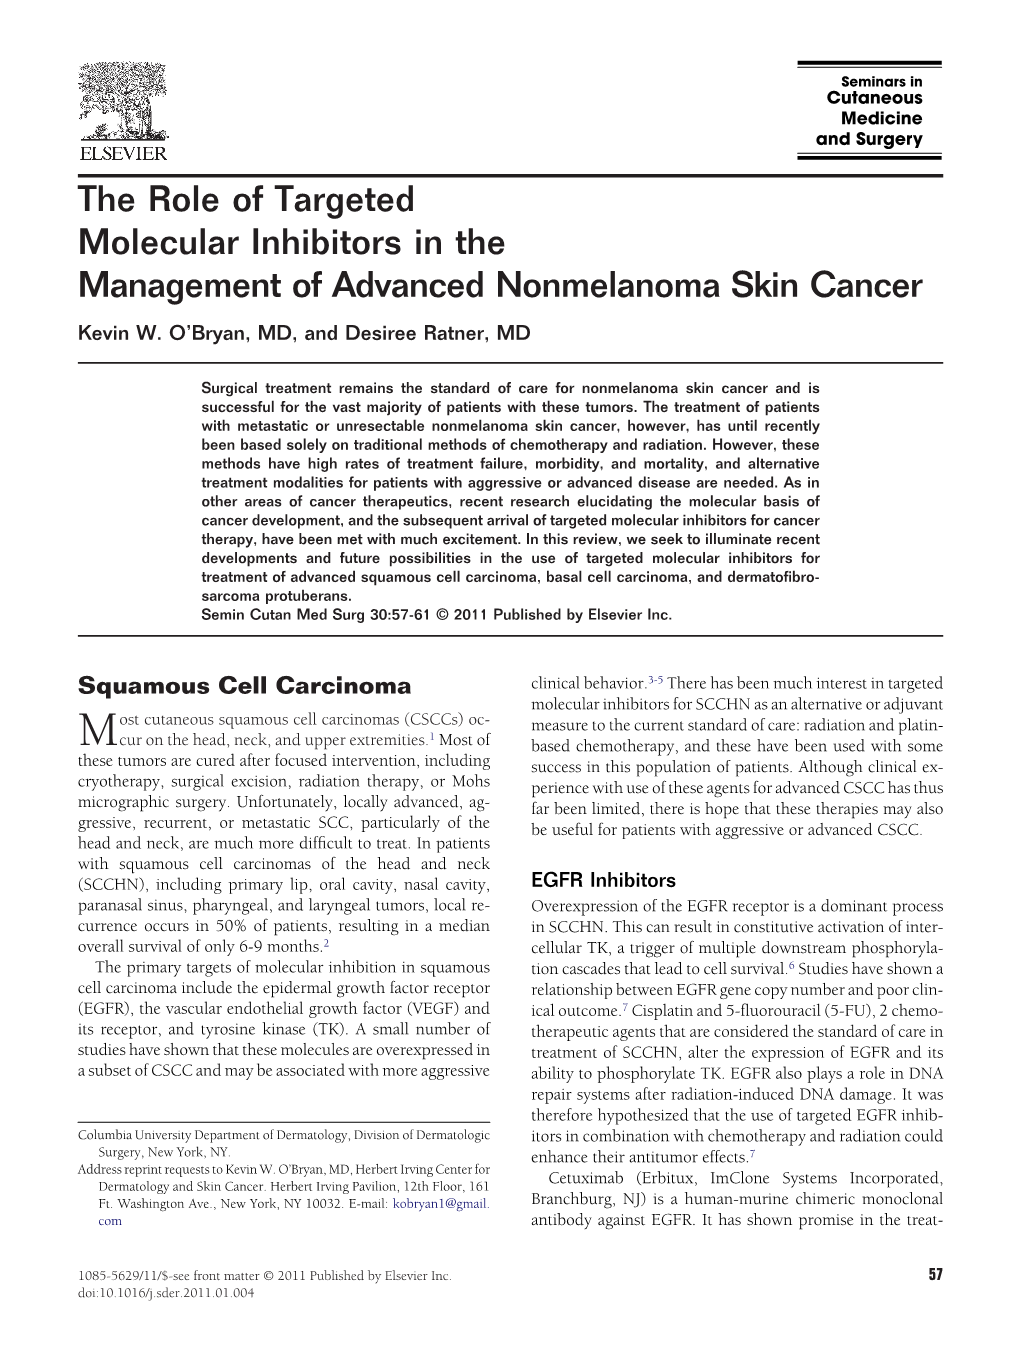 The Role of Targeted Molecular Inhibitors in the Management of Advanced Nonmelanoma Skin Cancer Kevin W